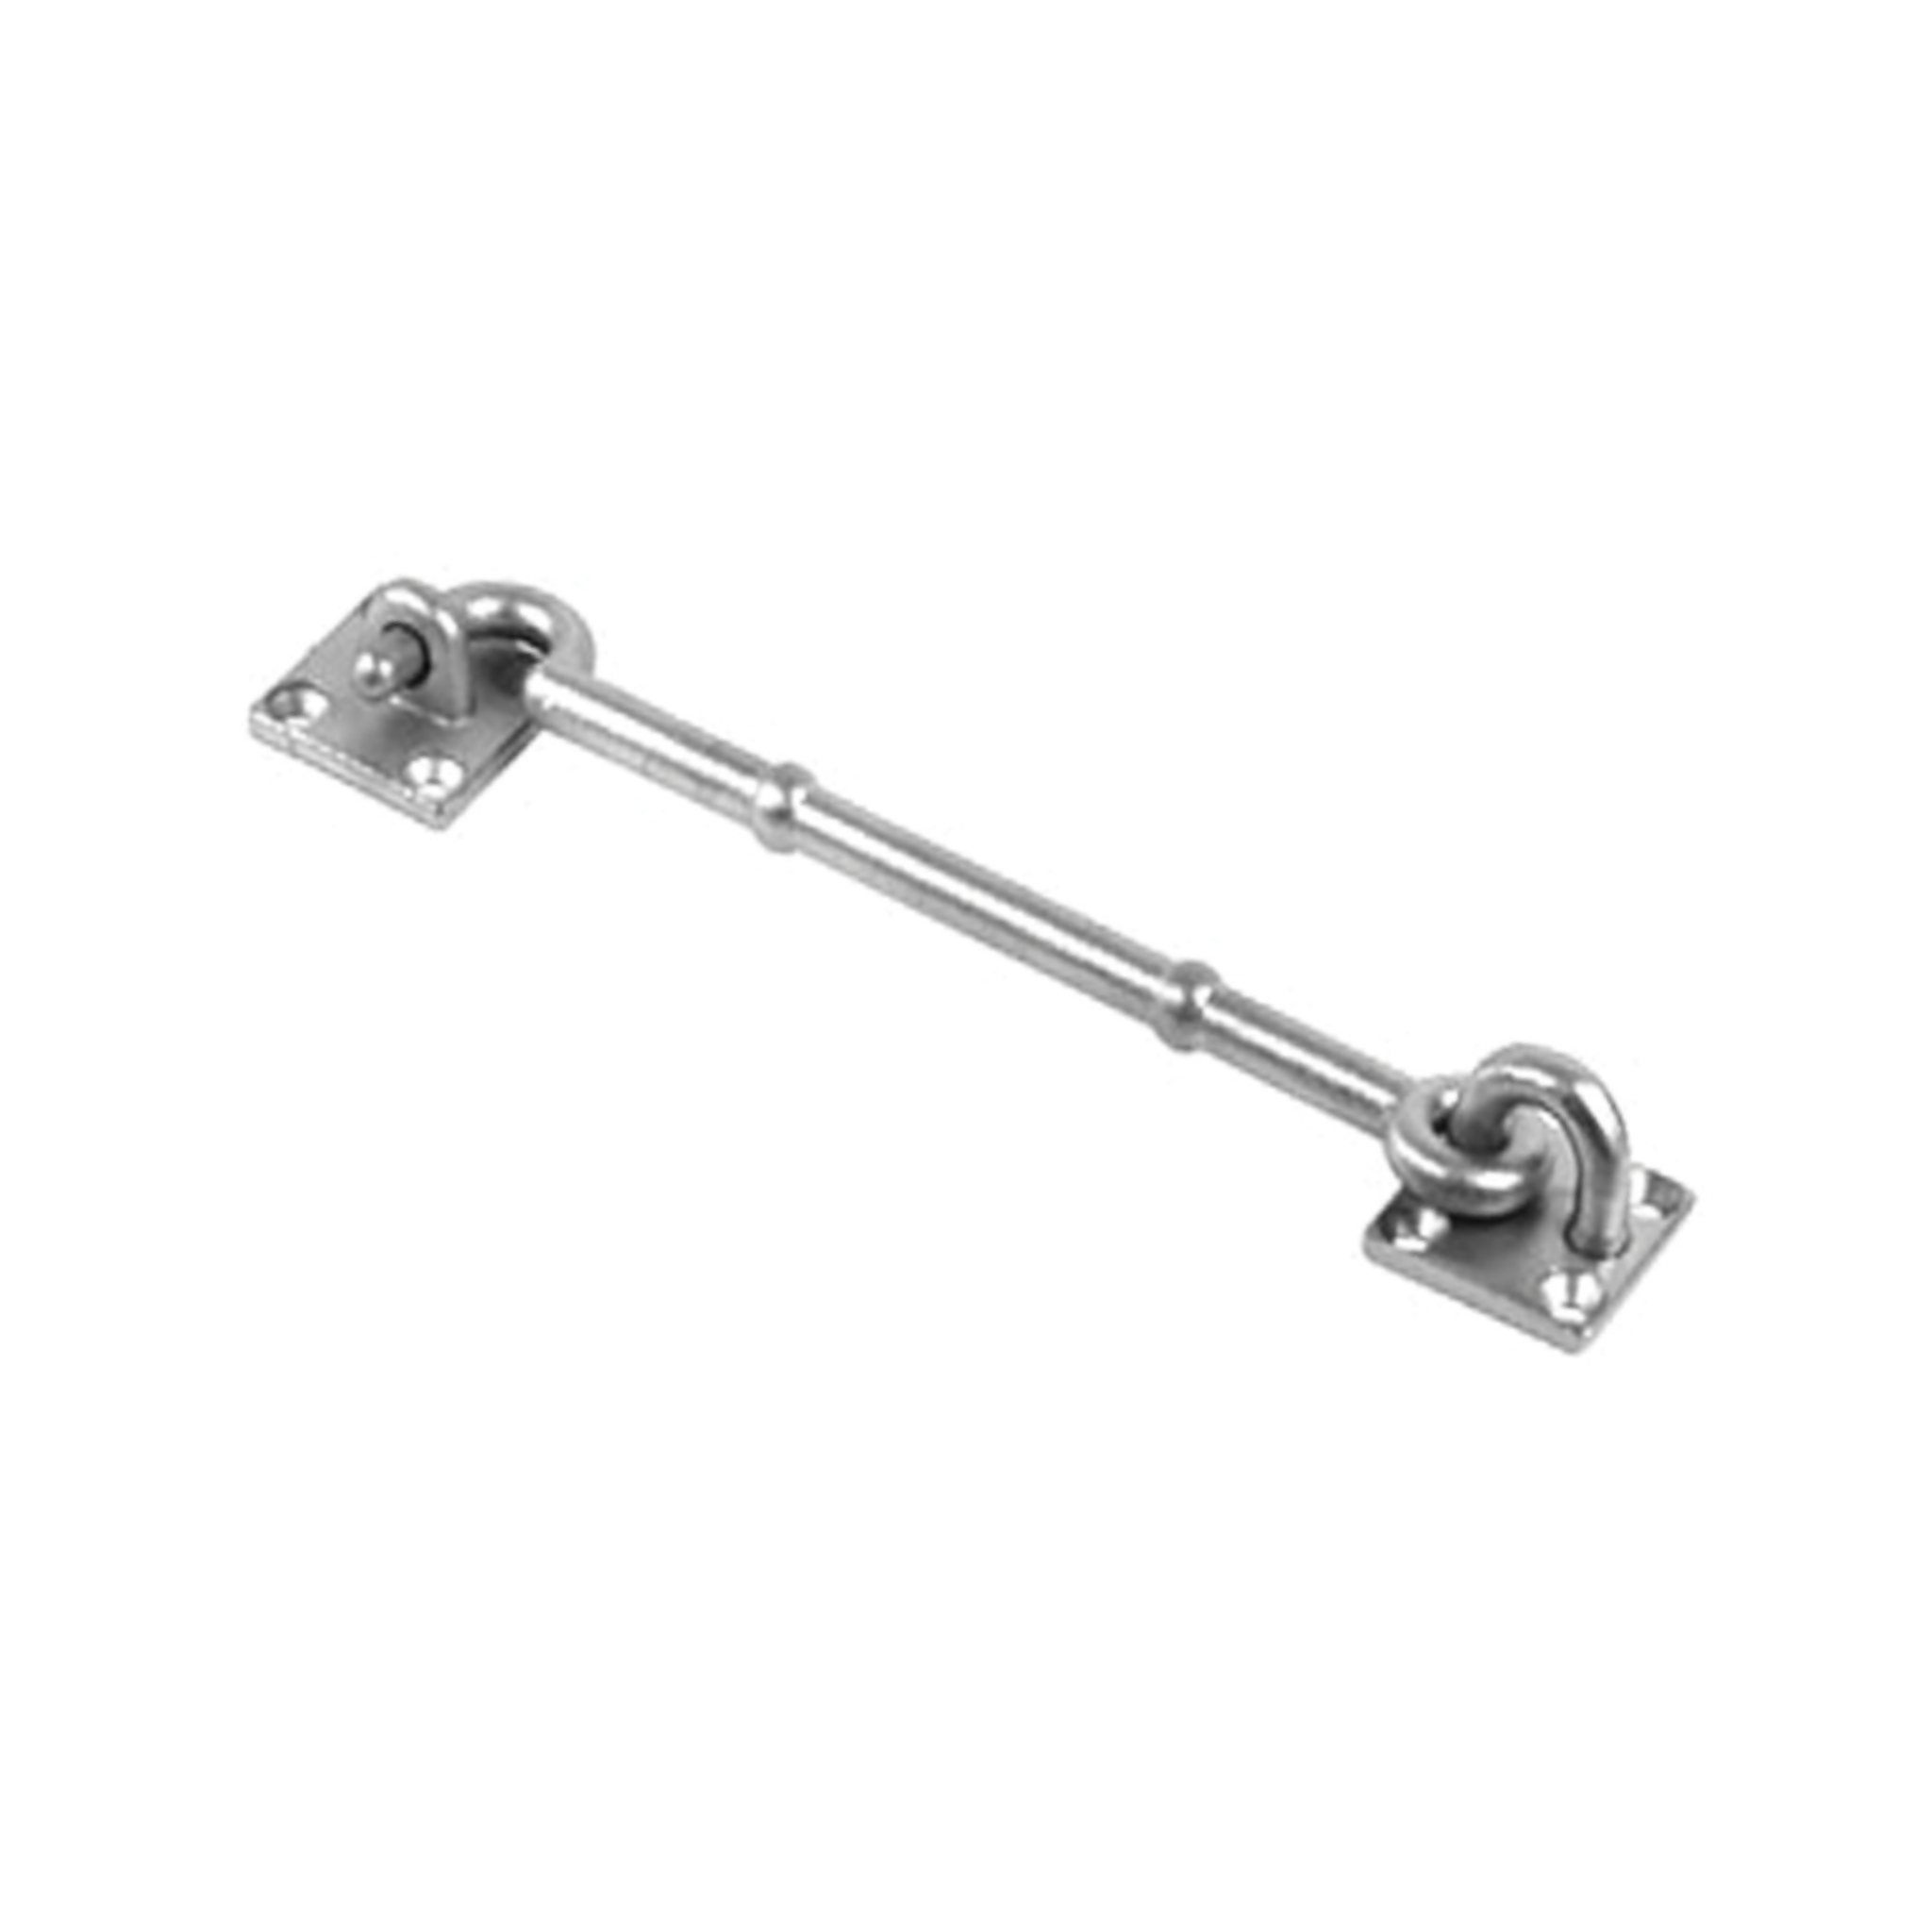 QS4449/1 100, Cabin Hook, 100mm (l), Stainless Steel, QS